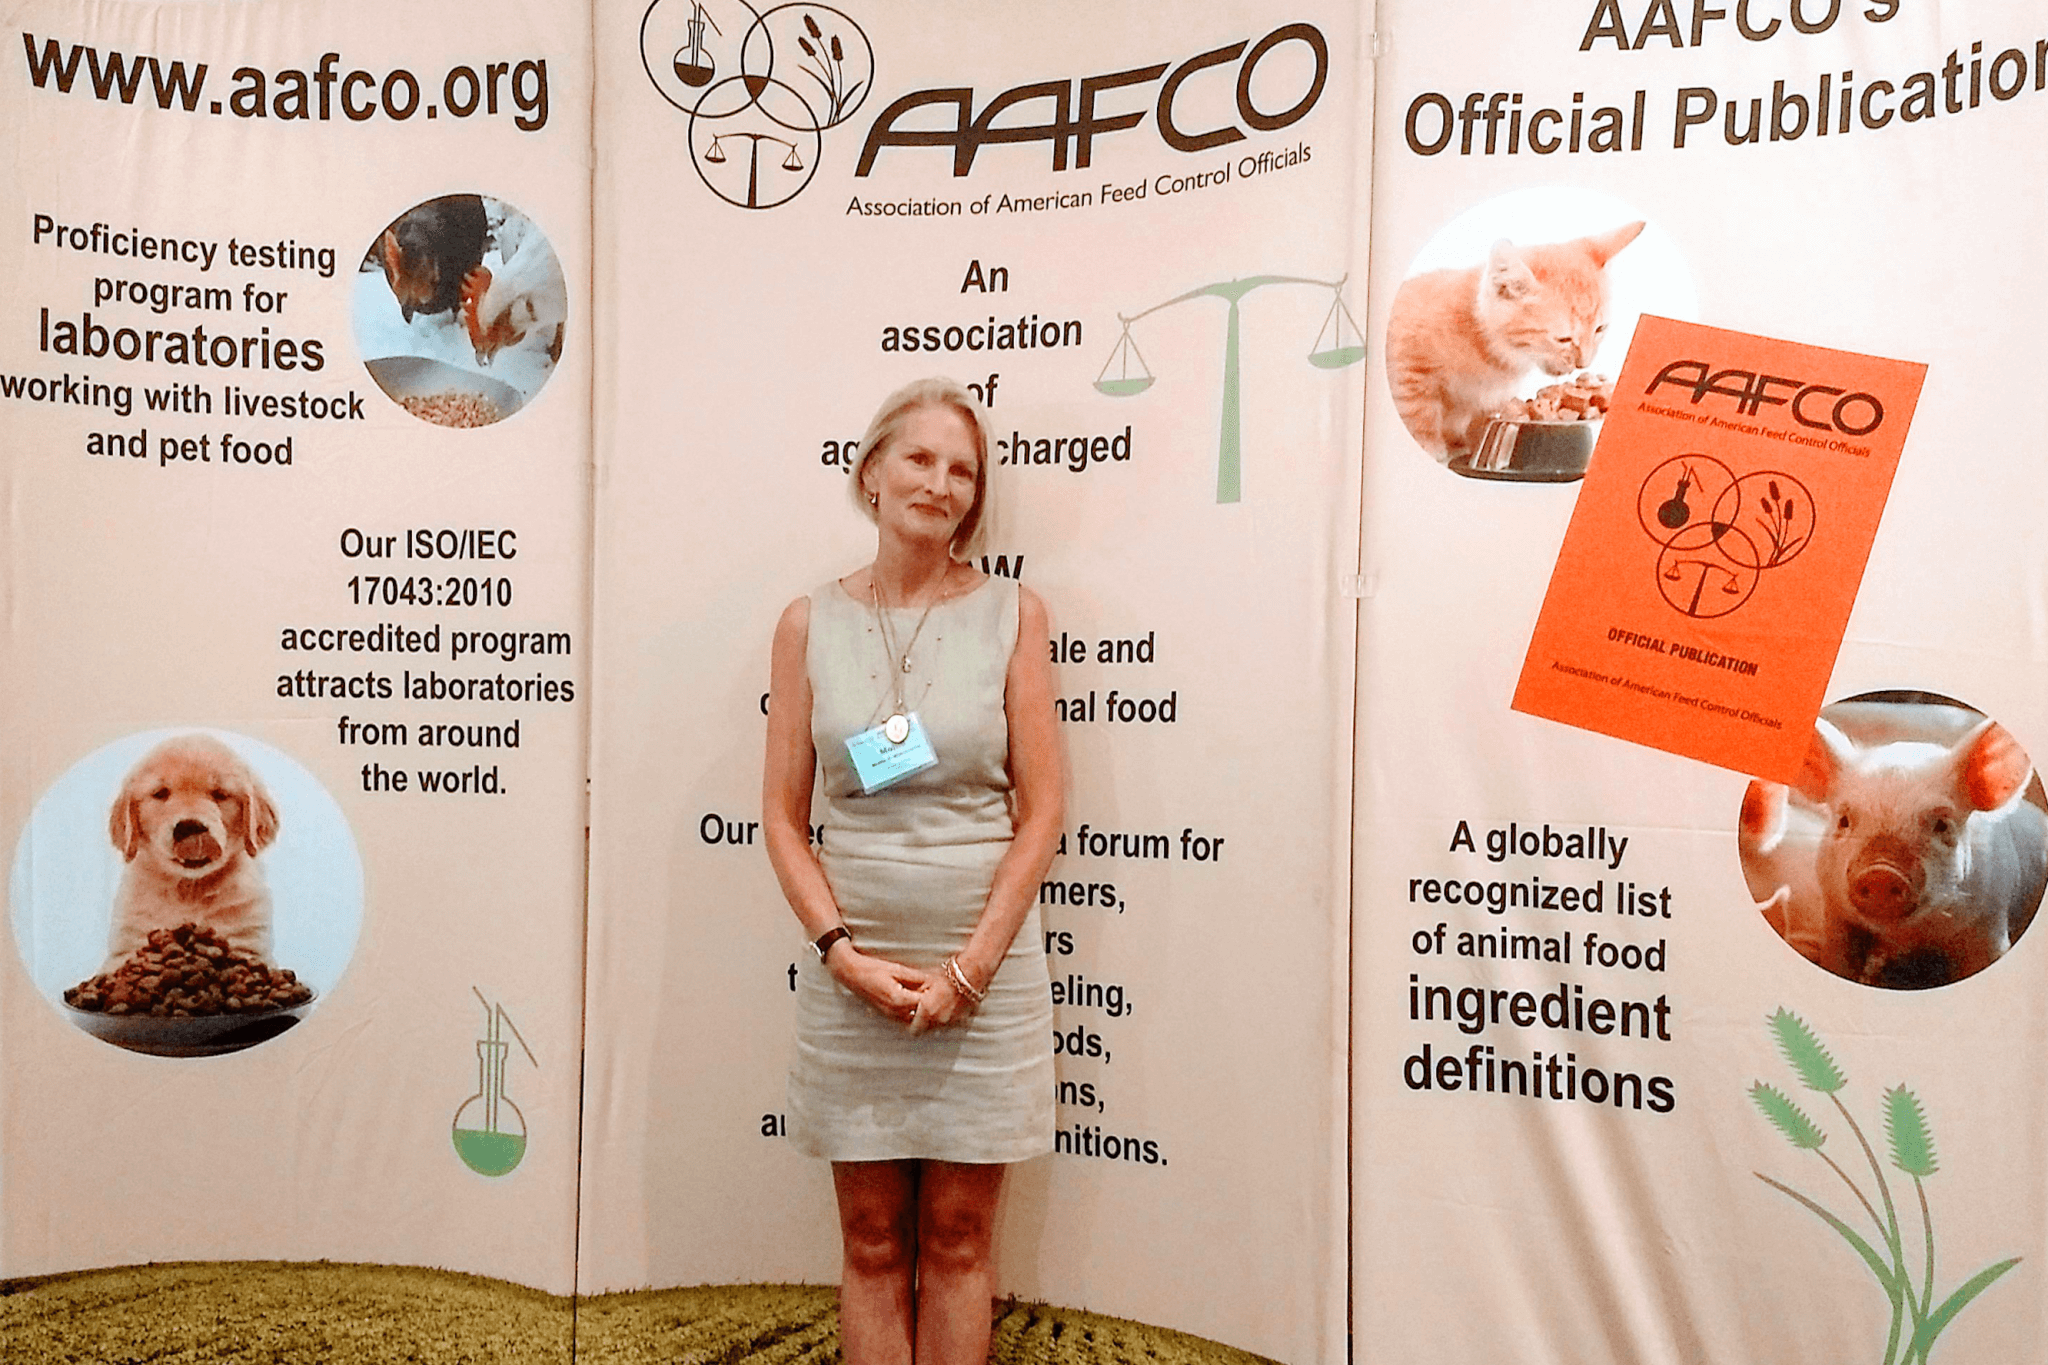 Mollie at AAFCO in Florida 2018Mollie Morrissette of Poisoned Pets at AAFCO conference in Florida 2018